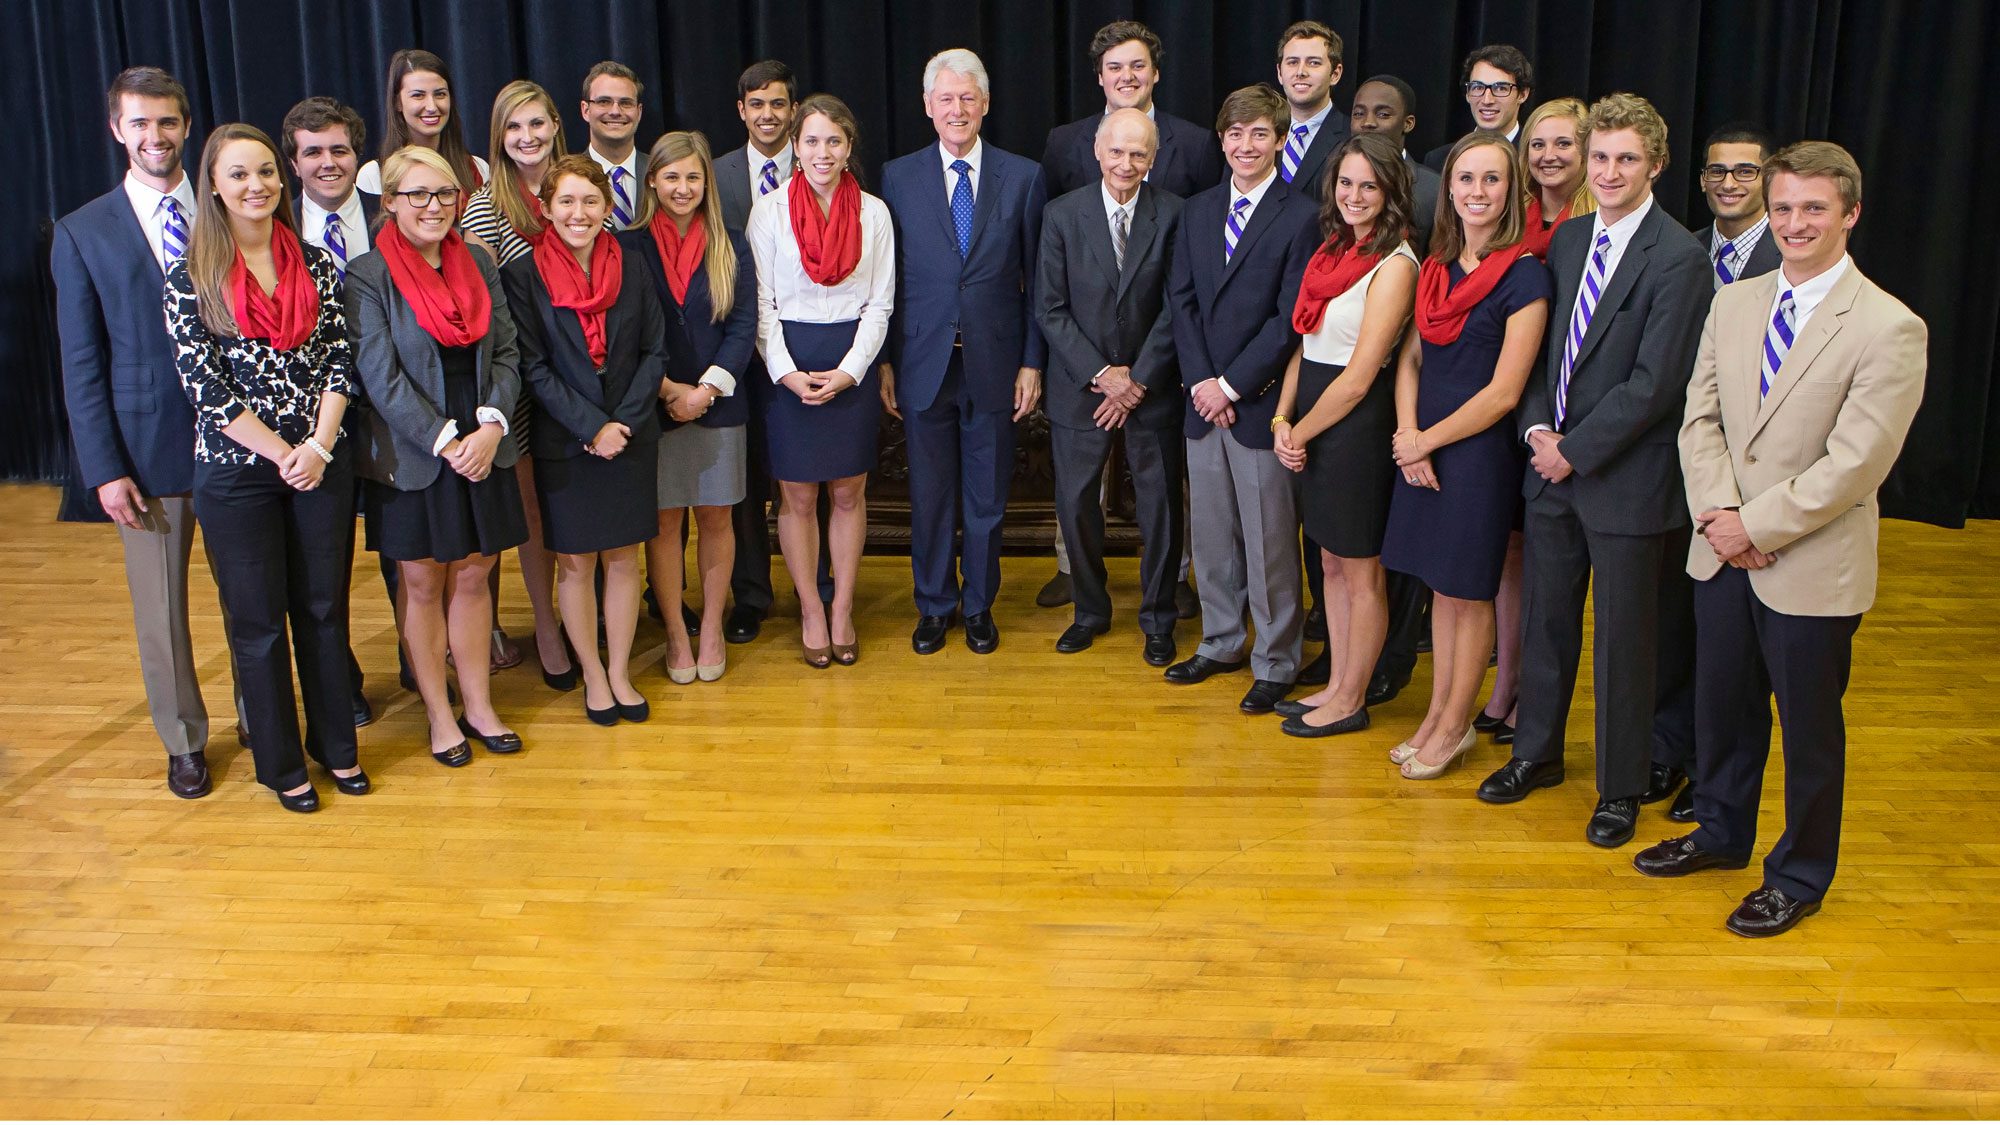 Riley Institute students with former President Bill Clinton